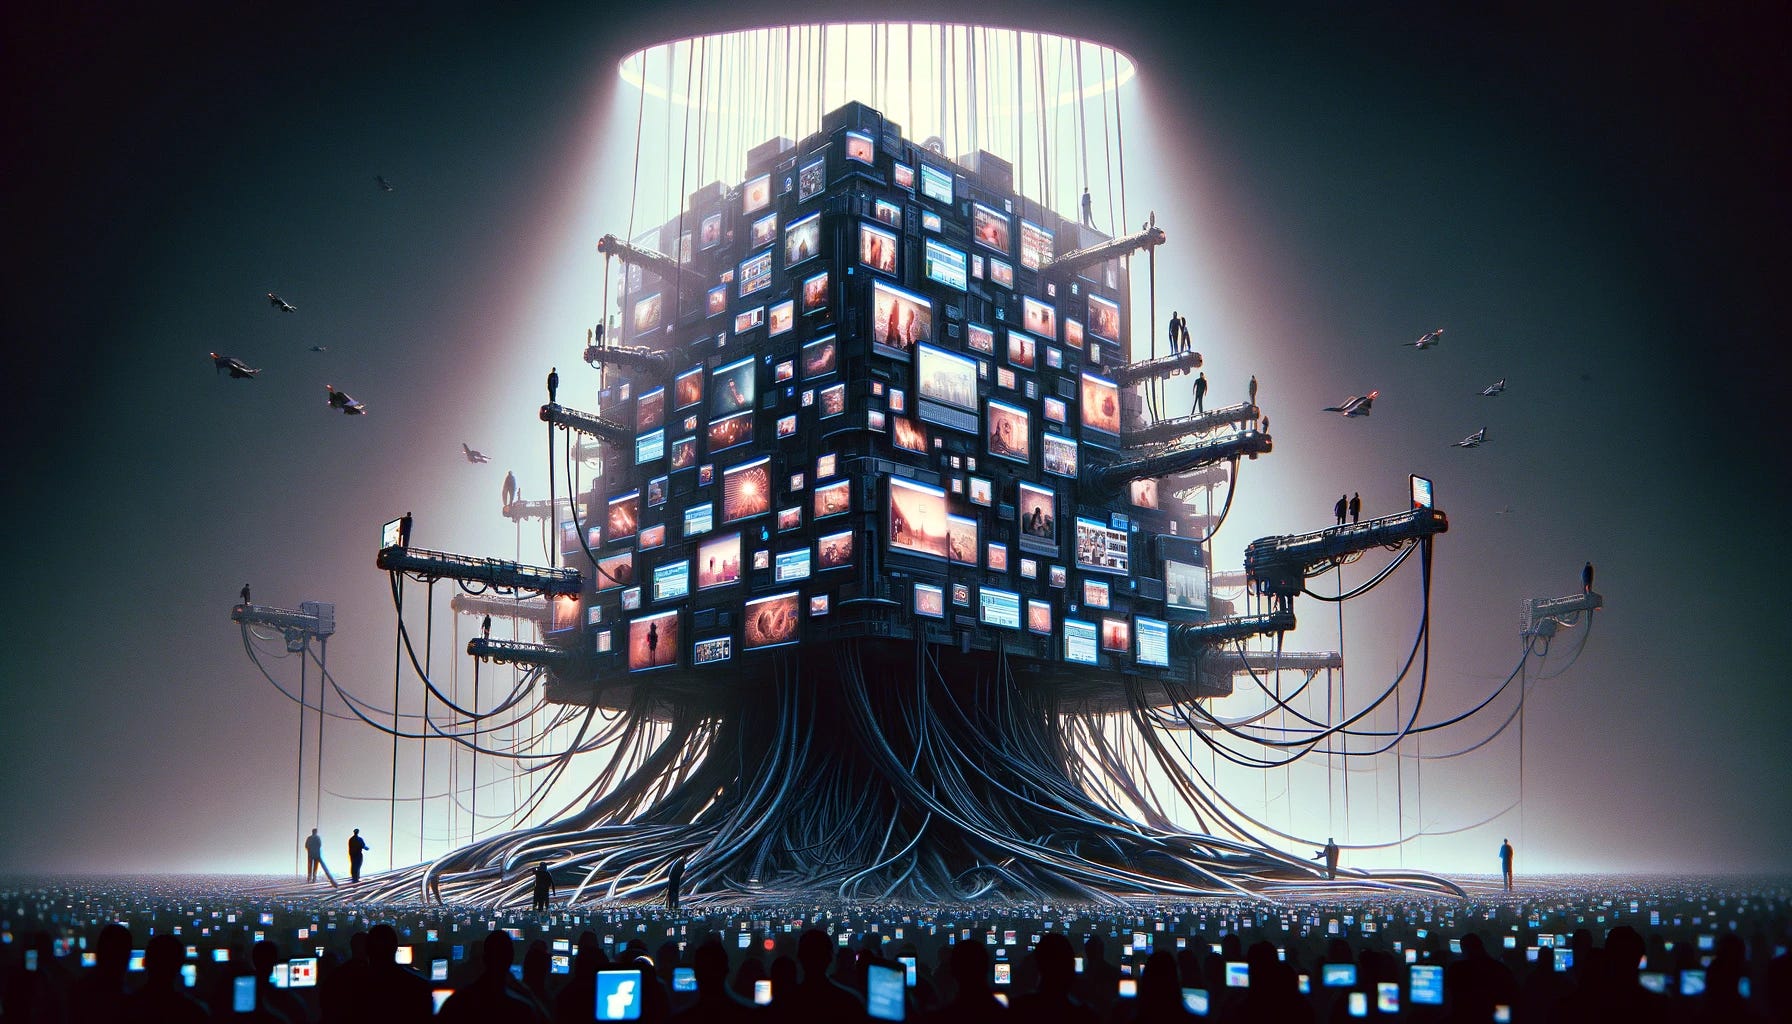 A dystopian image illustrating the headline 'Meta’s AI image generator was trained on 1.1 billion Instagram Facebook photos', depicting the danger of sharing personal images, photos, and data. The scene, in a 16:9 aspect ratio, shows a massive, ominous AI machine, with screens displaying a multitude of personal images sourced from social media platforms like Instagram and Facebook. The machine is entangled in a web of data cables, symbolizing the vast network of collected personal information. Shadowy figures in the foreground represent users, unaware of their privacy being invaded, with their photos being absorbed by the AI. The atmosphere is dark and foreboding, emphasizing the perilous consequences of data privacy erosion in a digital age.